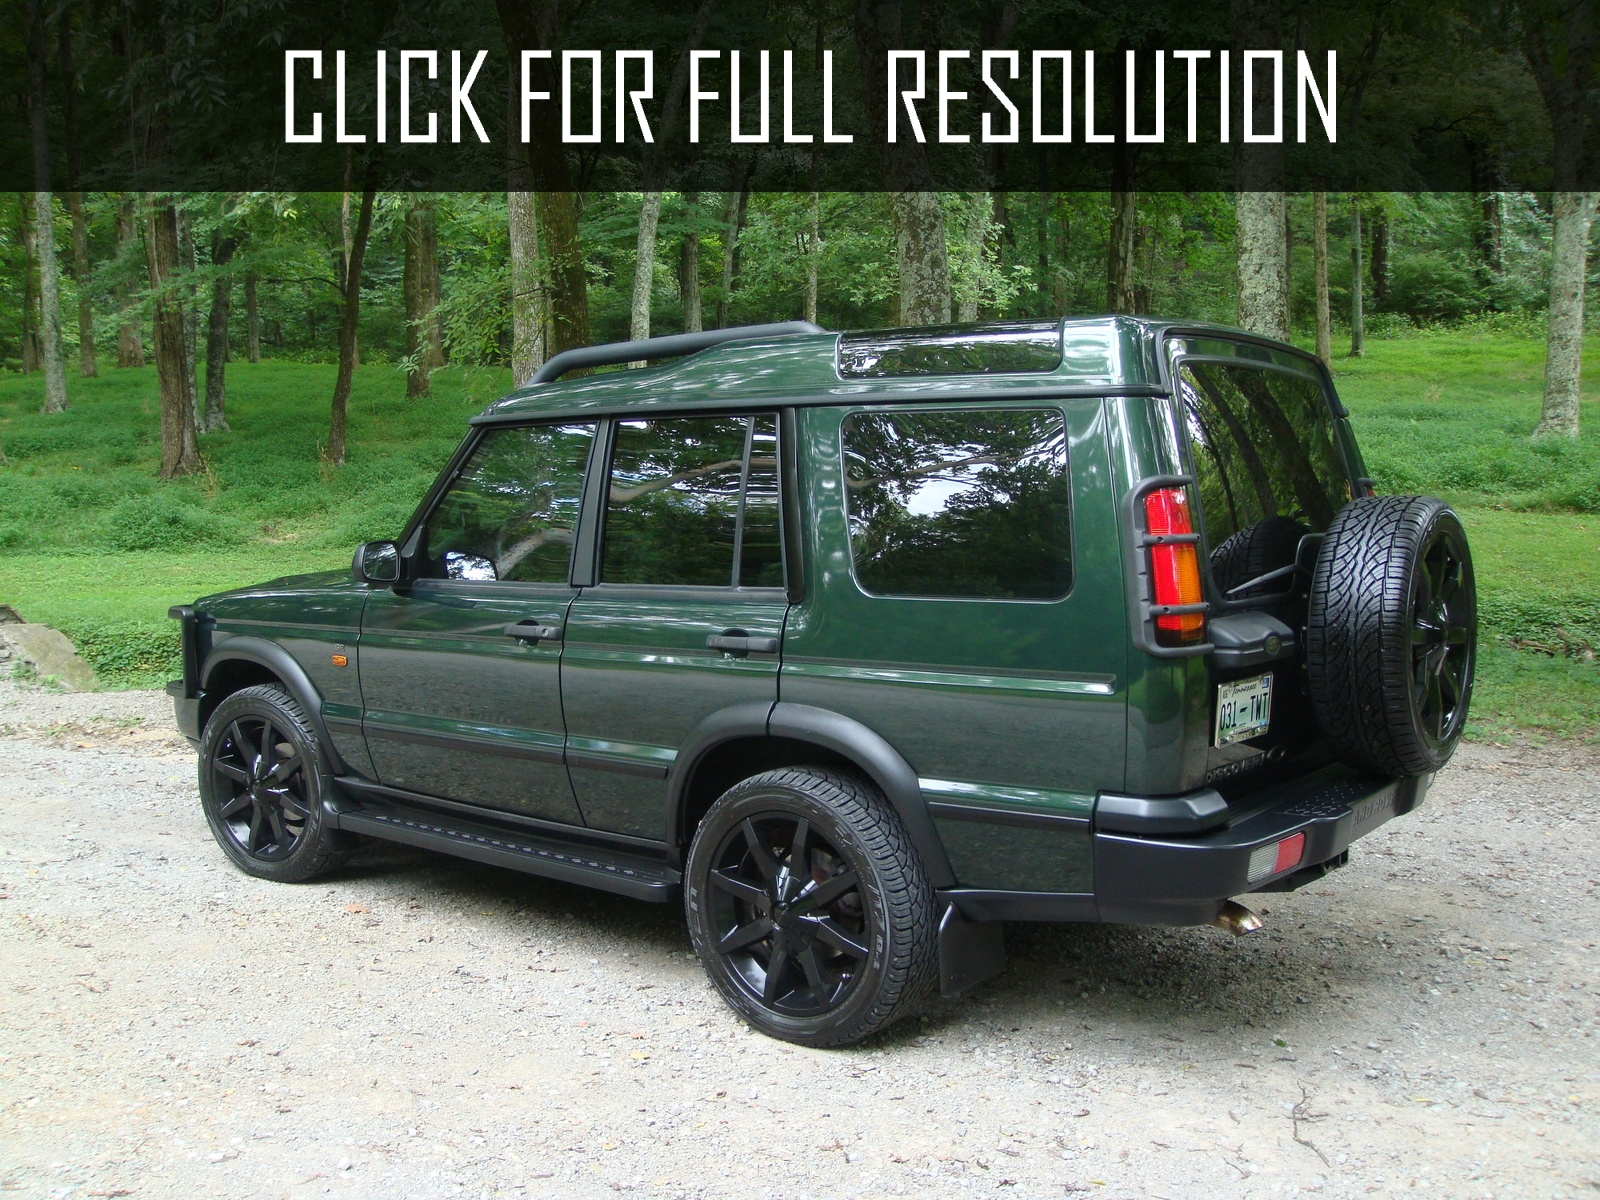 1999 Land Rover Discovery 2